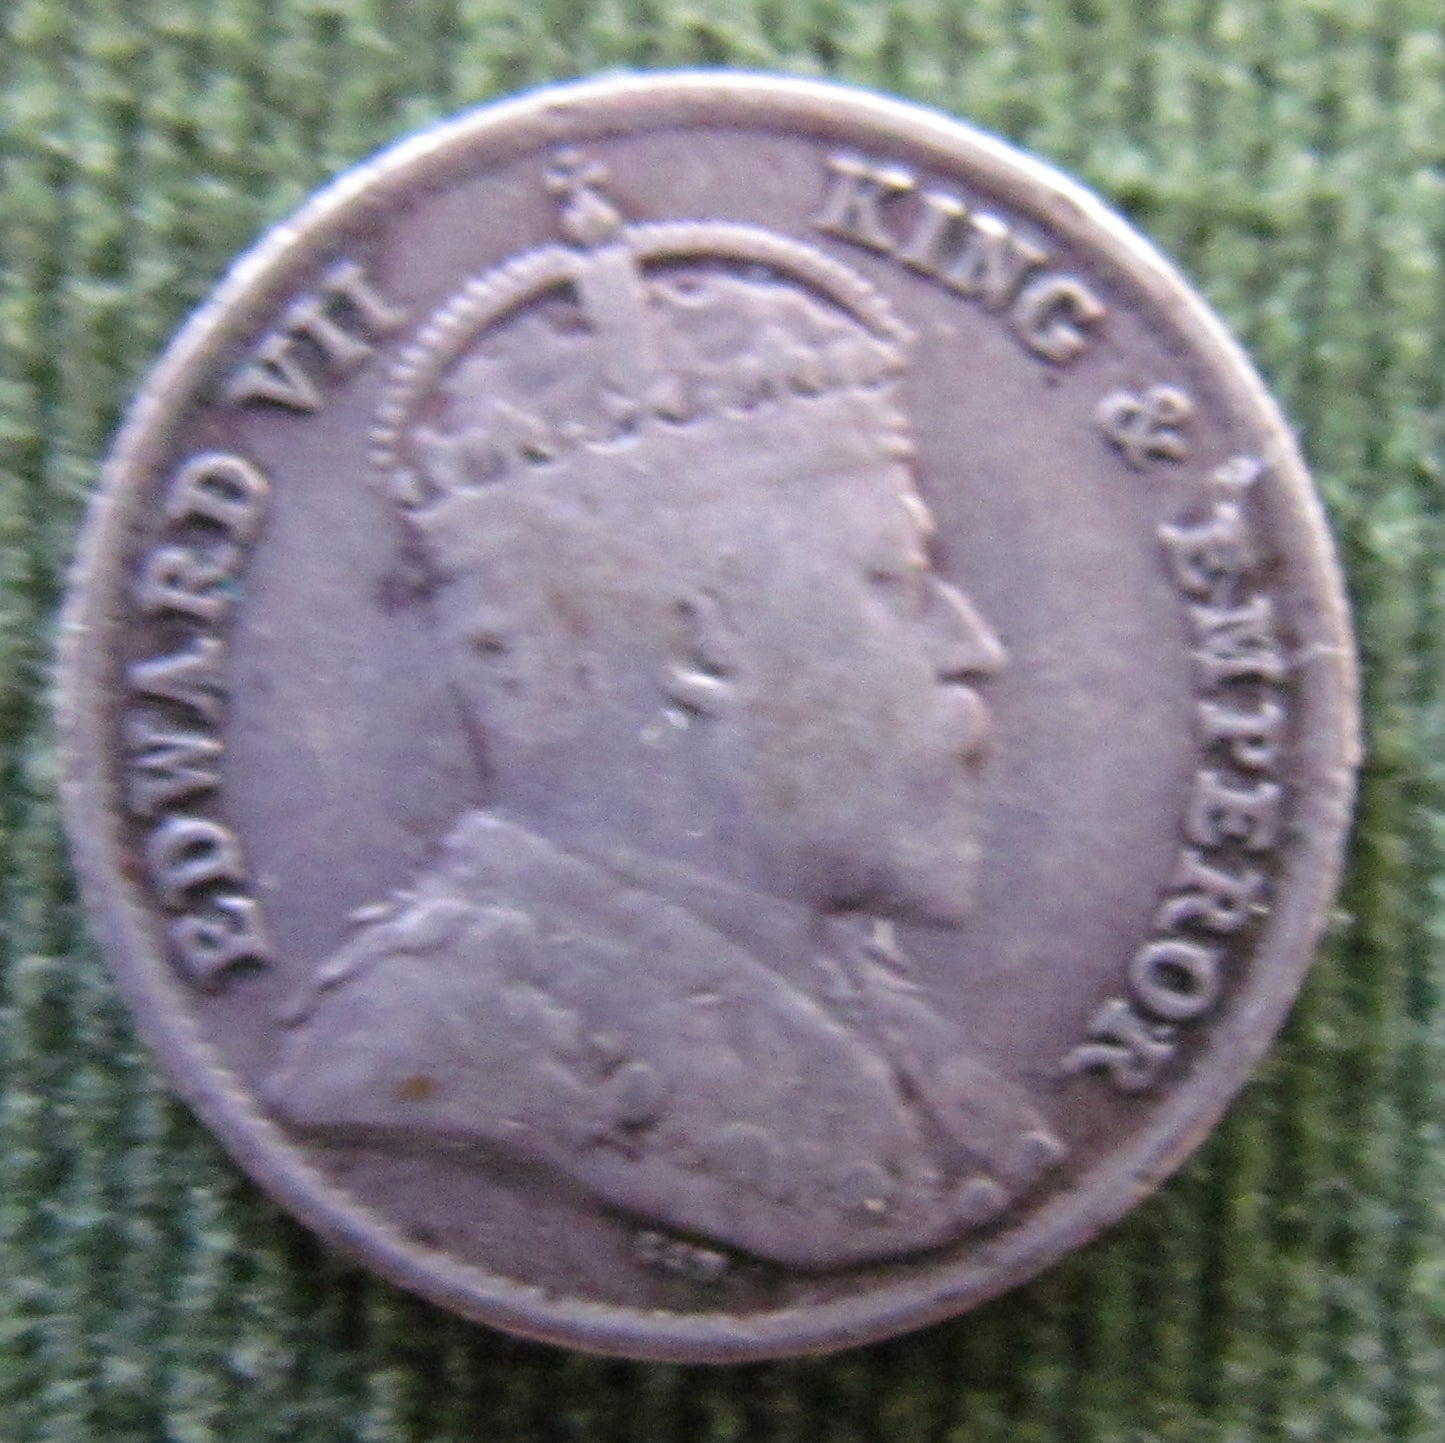 Straits Settlements 1902 5 Cent King Edward VII Coin - Circulated